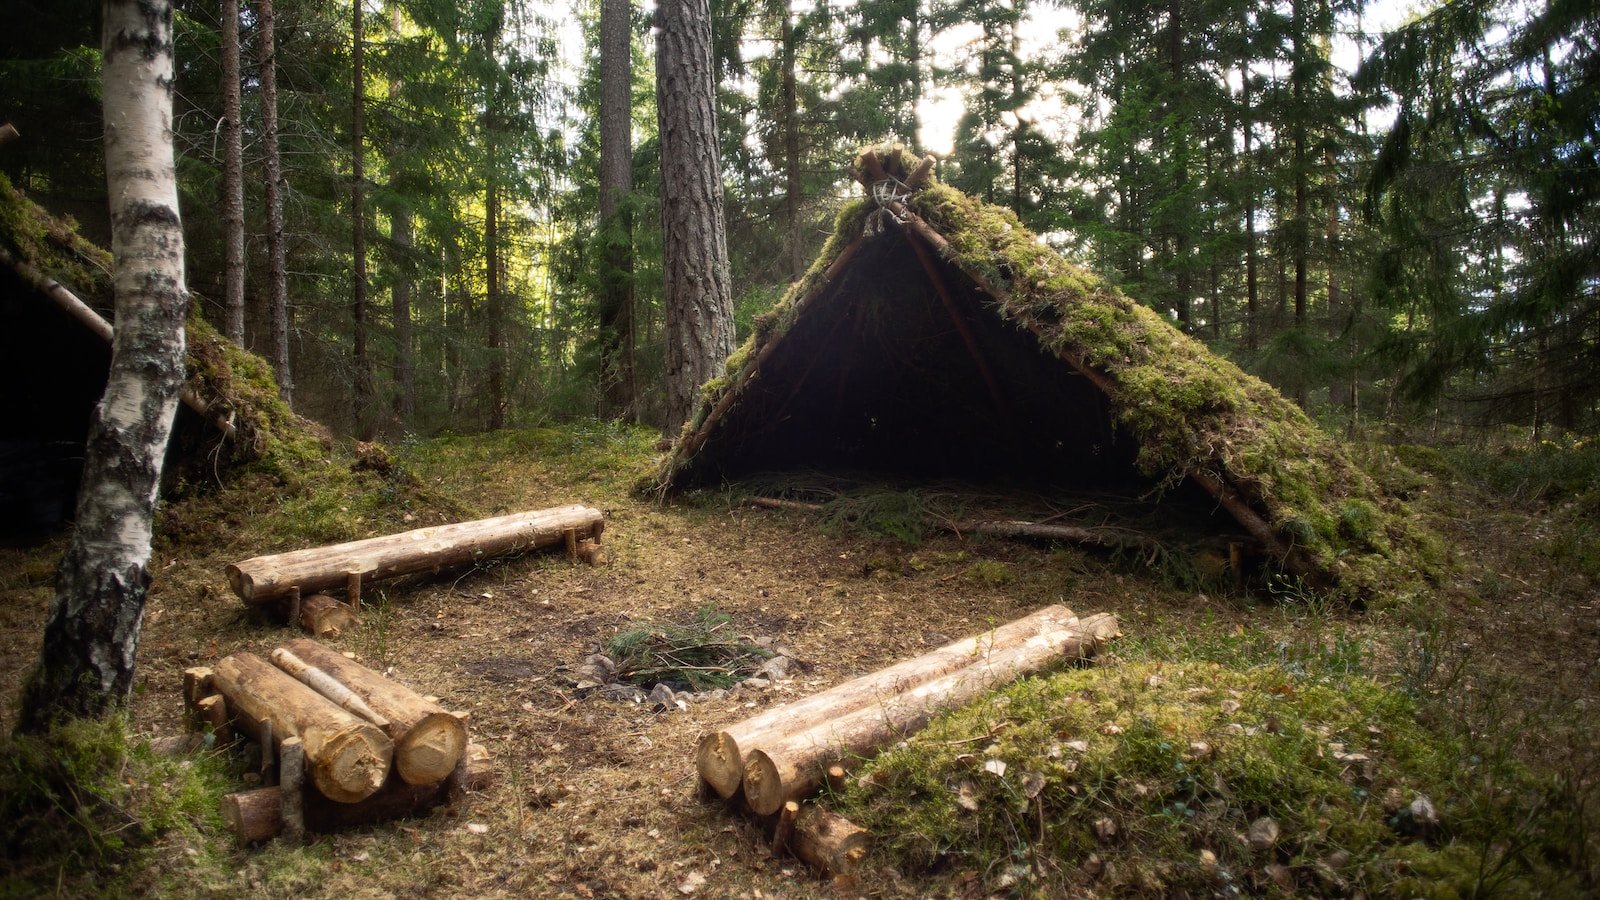 Reconnect With Your Wild Side On An Off-grid Wilderness Survival Adventure